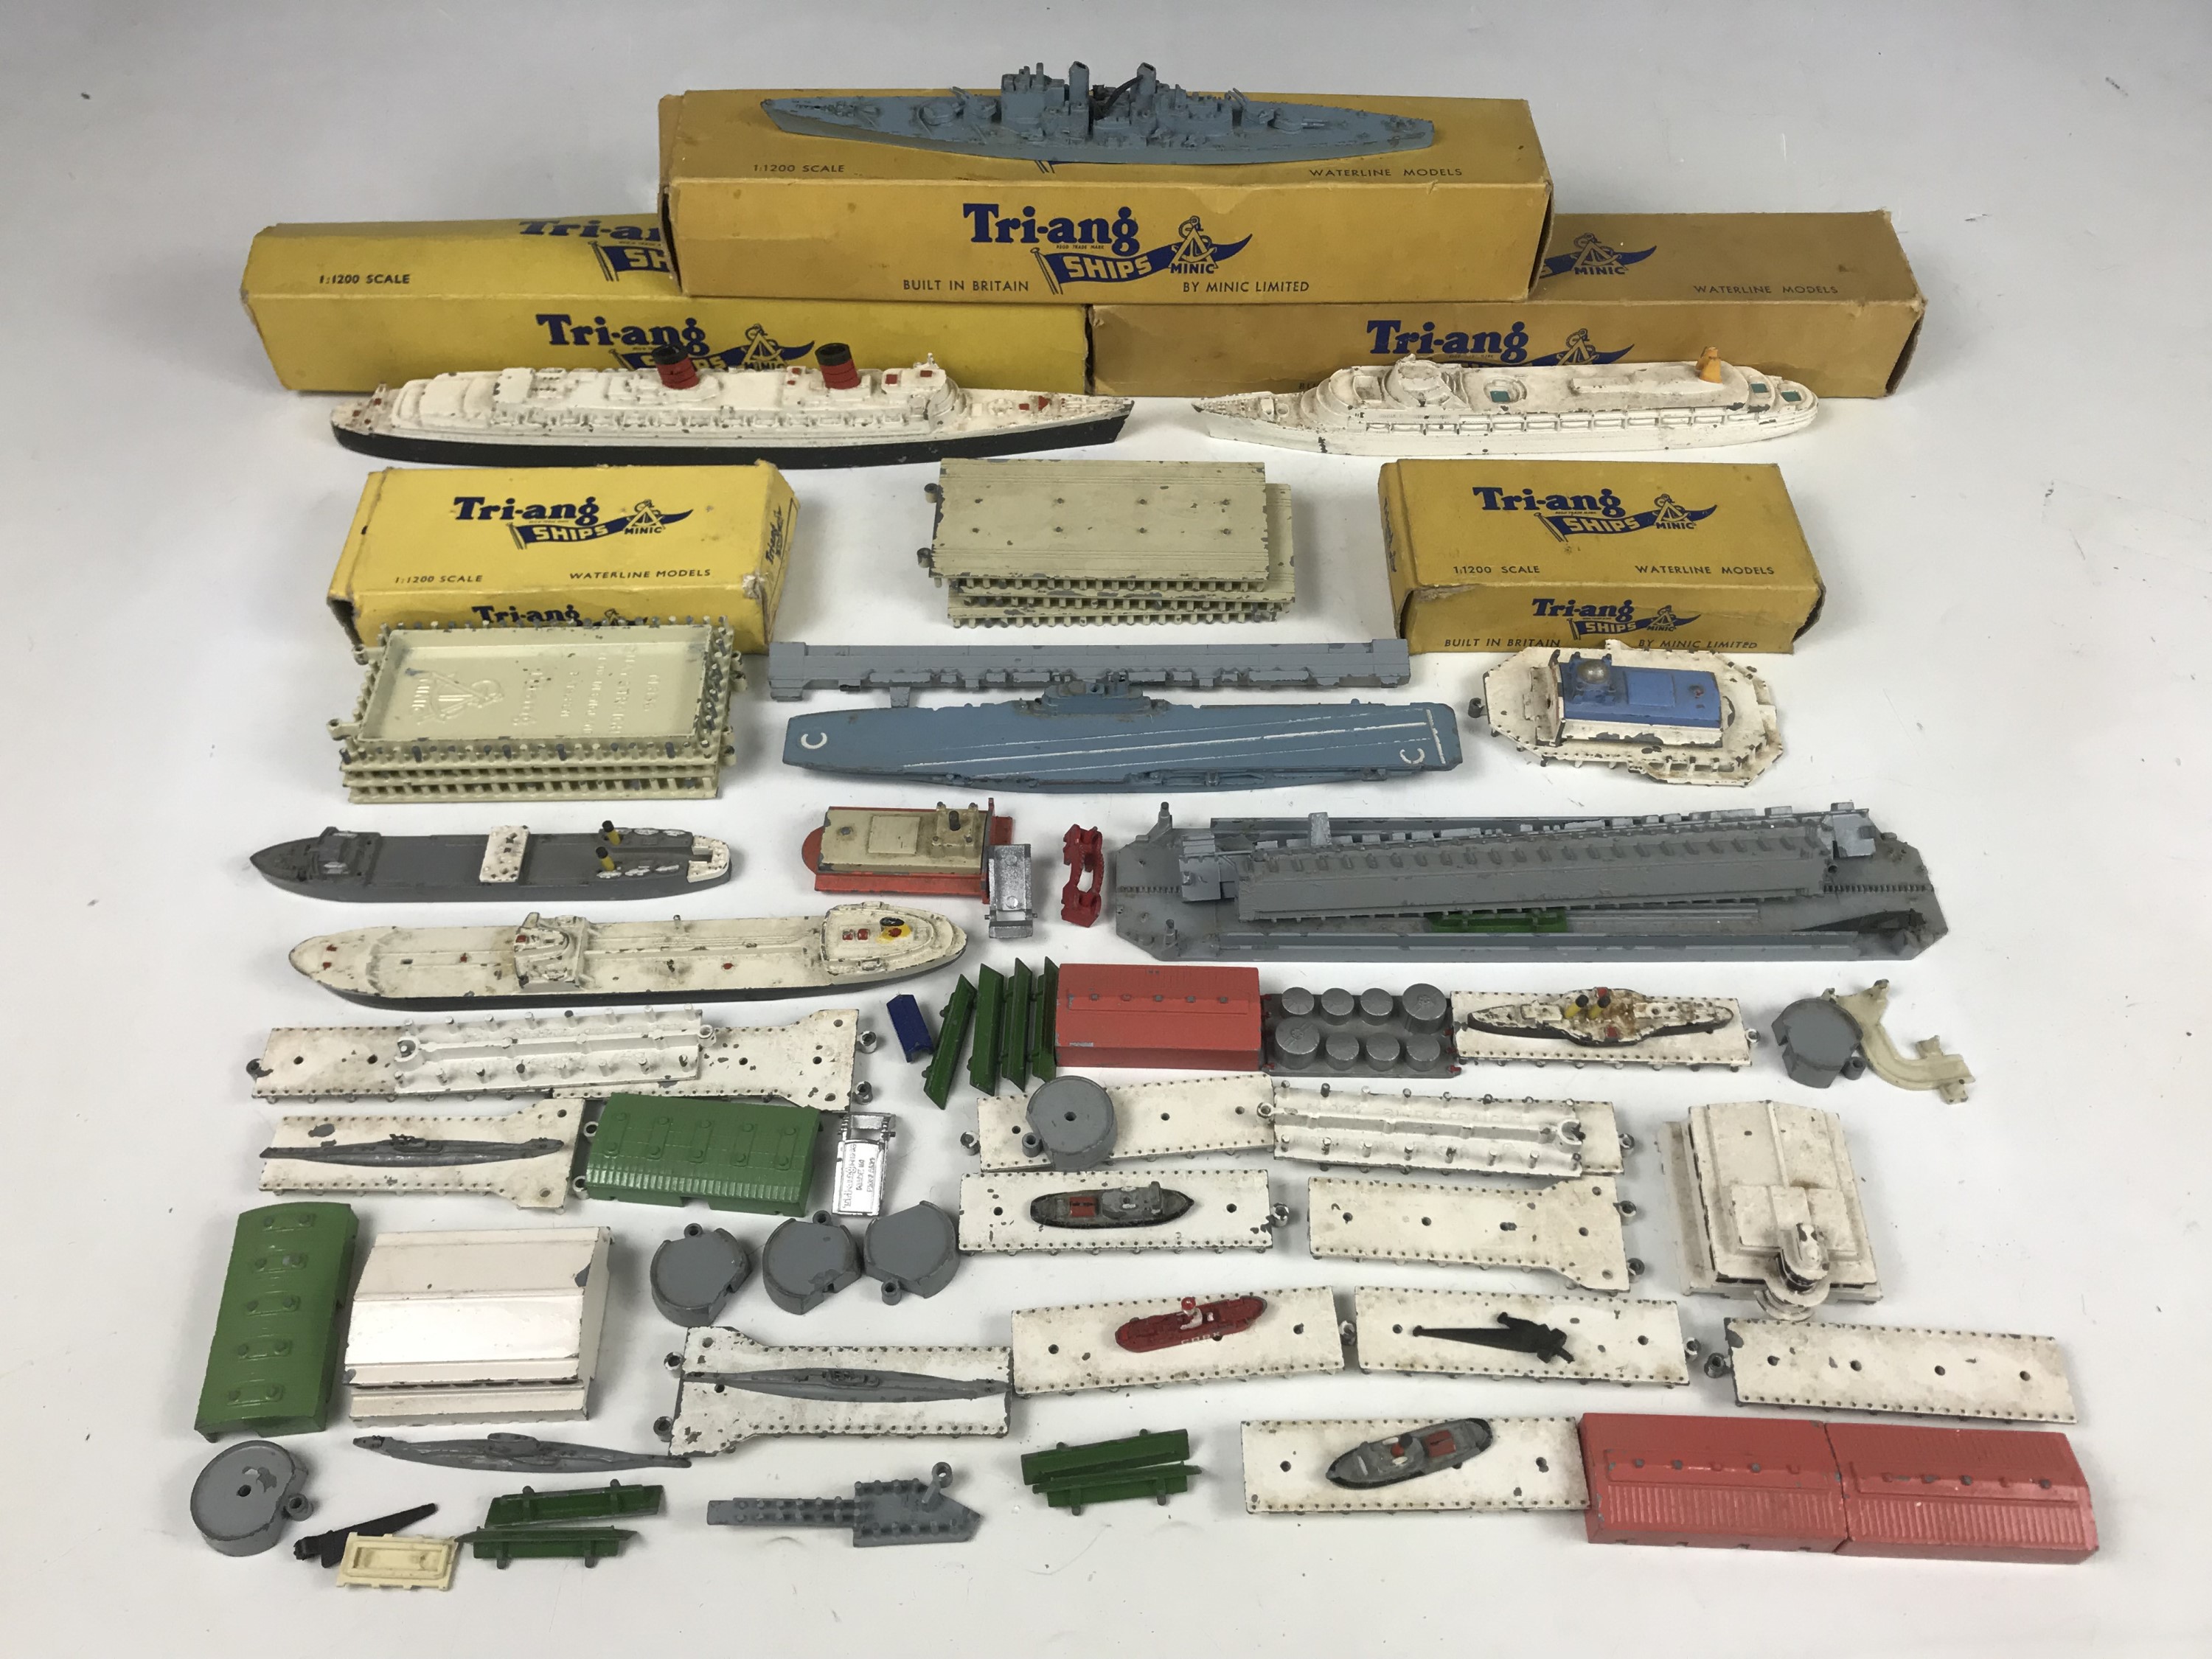 A quantity of Tri-ang Minic Waterline die-cast models and related accessories